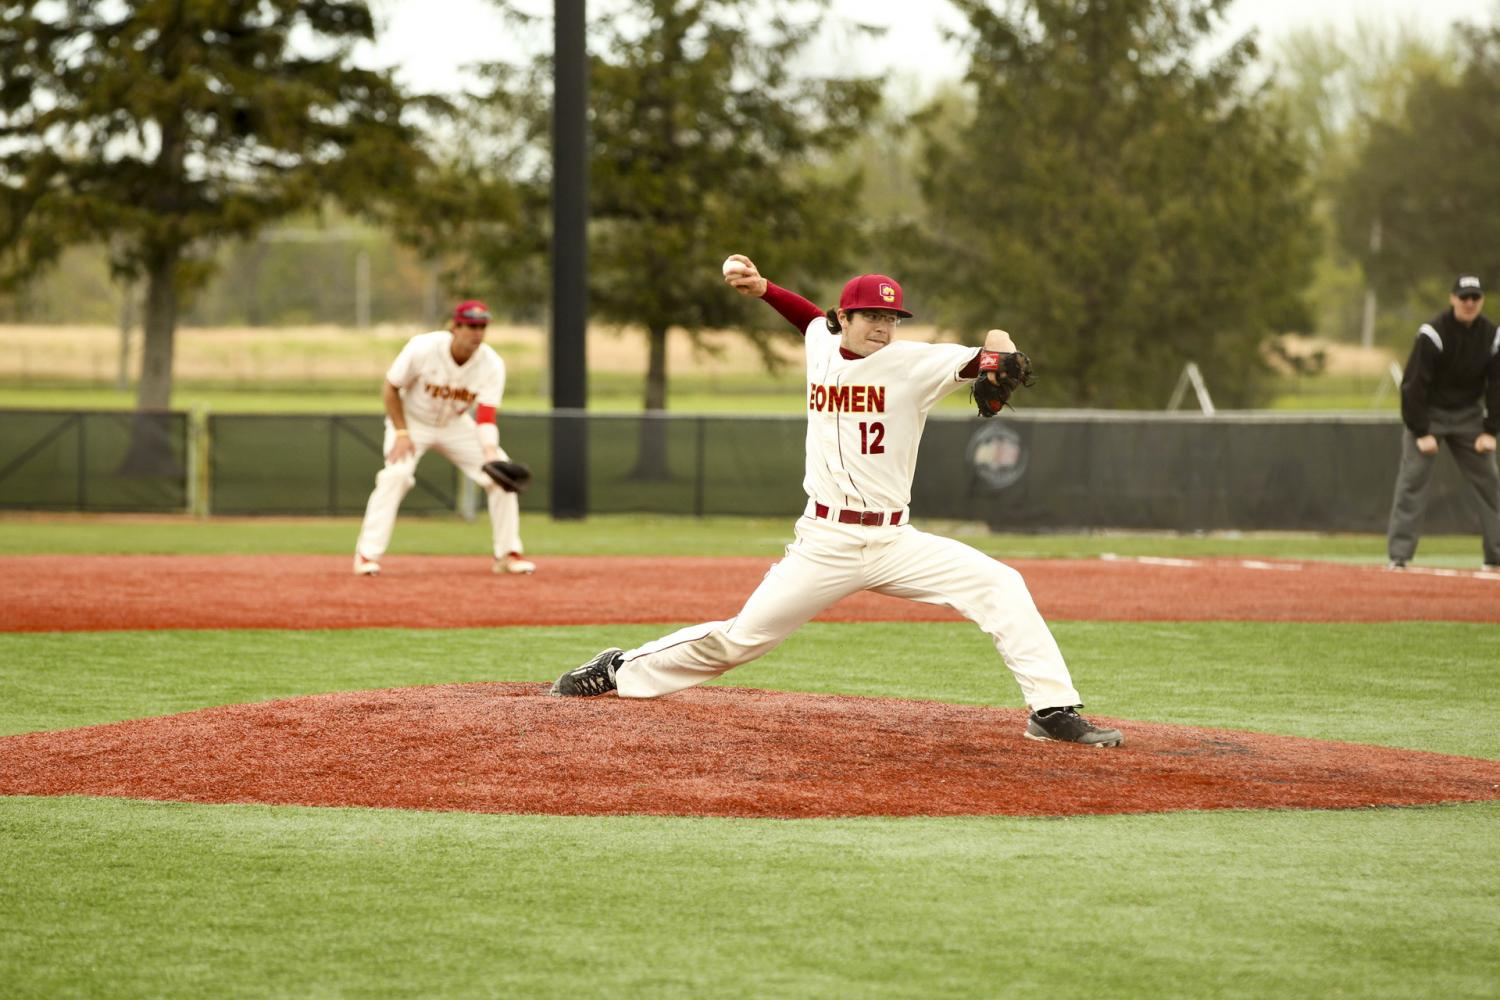 Junior Sean Kiley has been a staple of the Yeomen pitching staff this season. The Studio City, CA, native was named the NCAC Pitcher of the Week for striking out 13 hitters in Oberlin’s 6–2 win over Kenyon College last Saturday.  